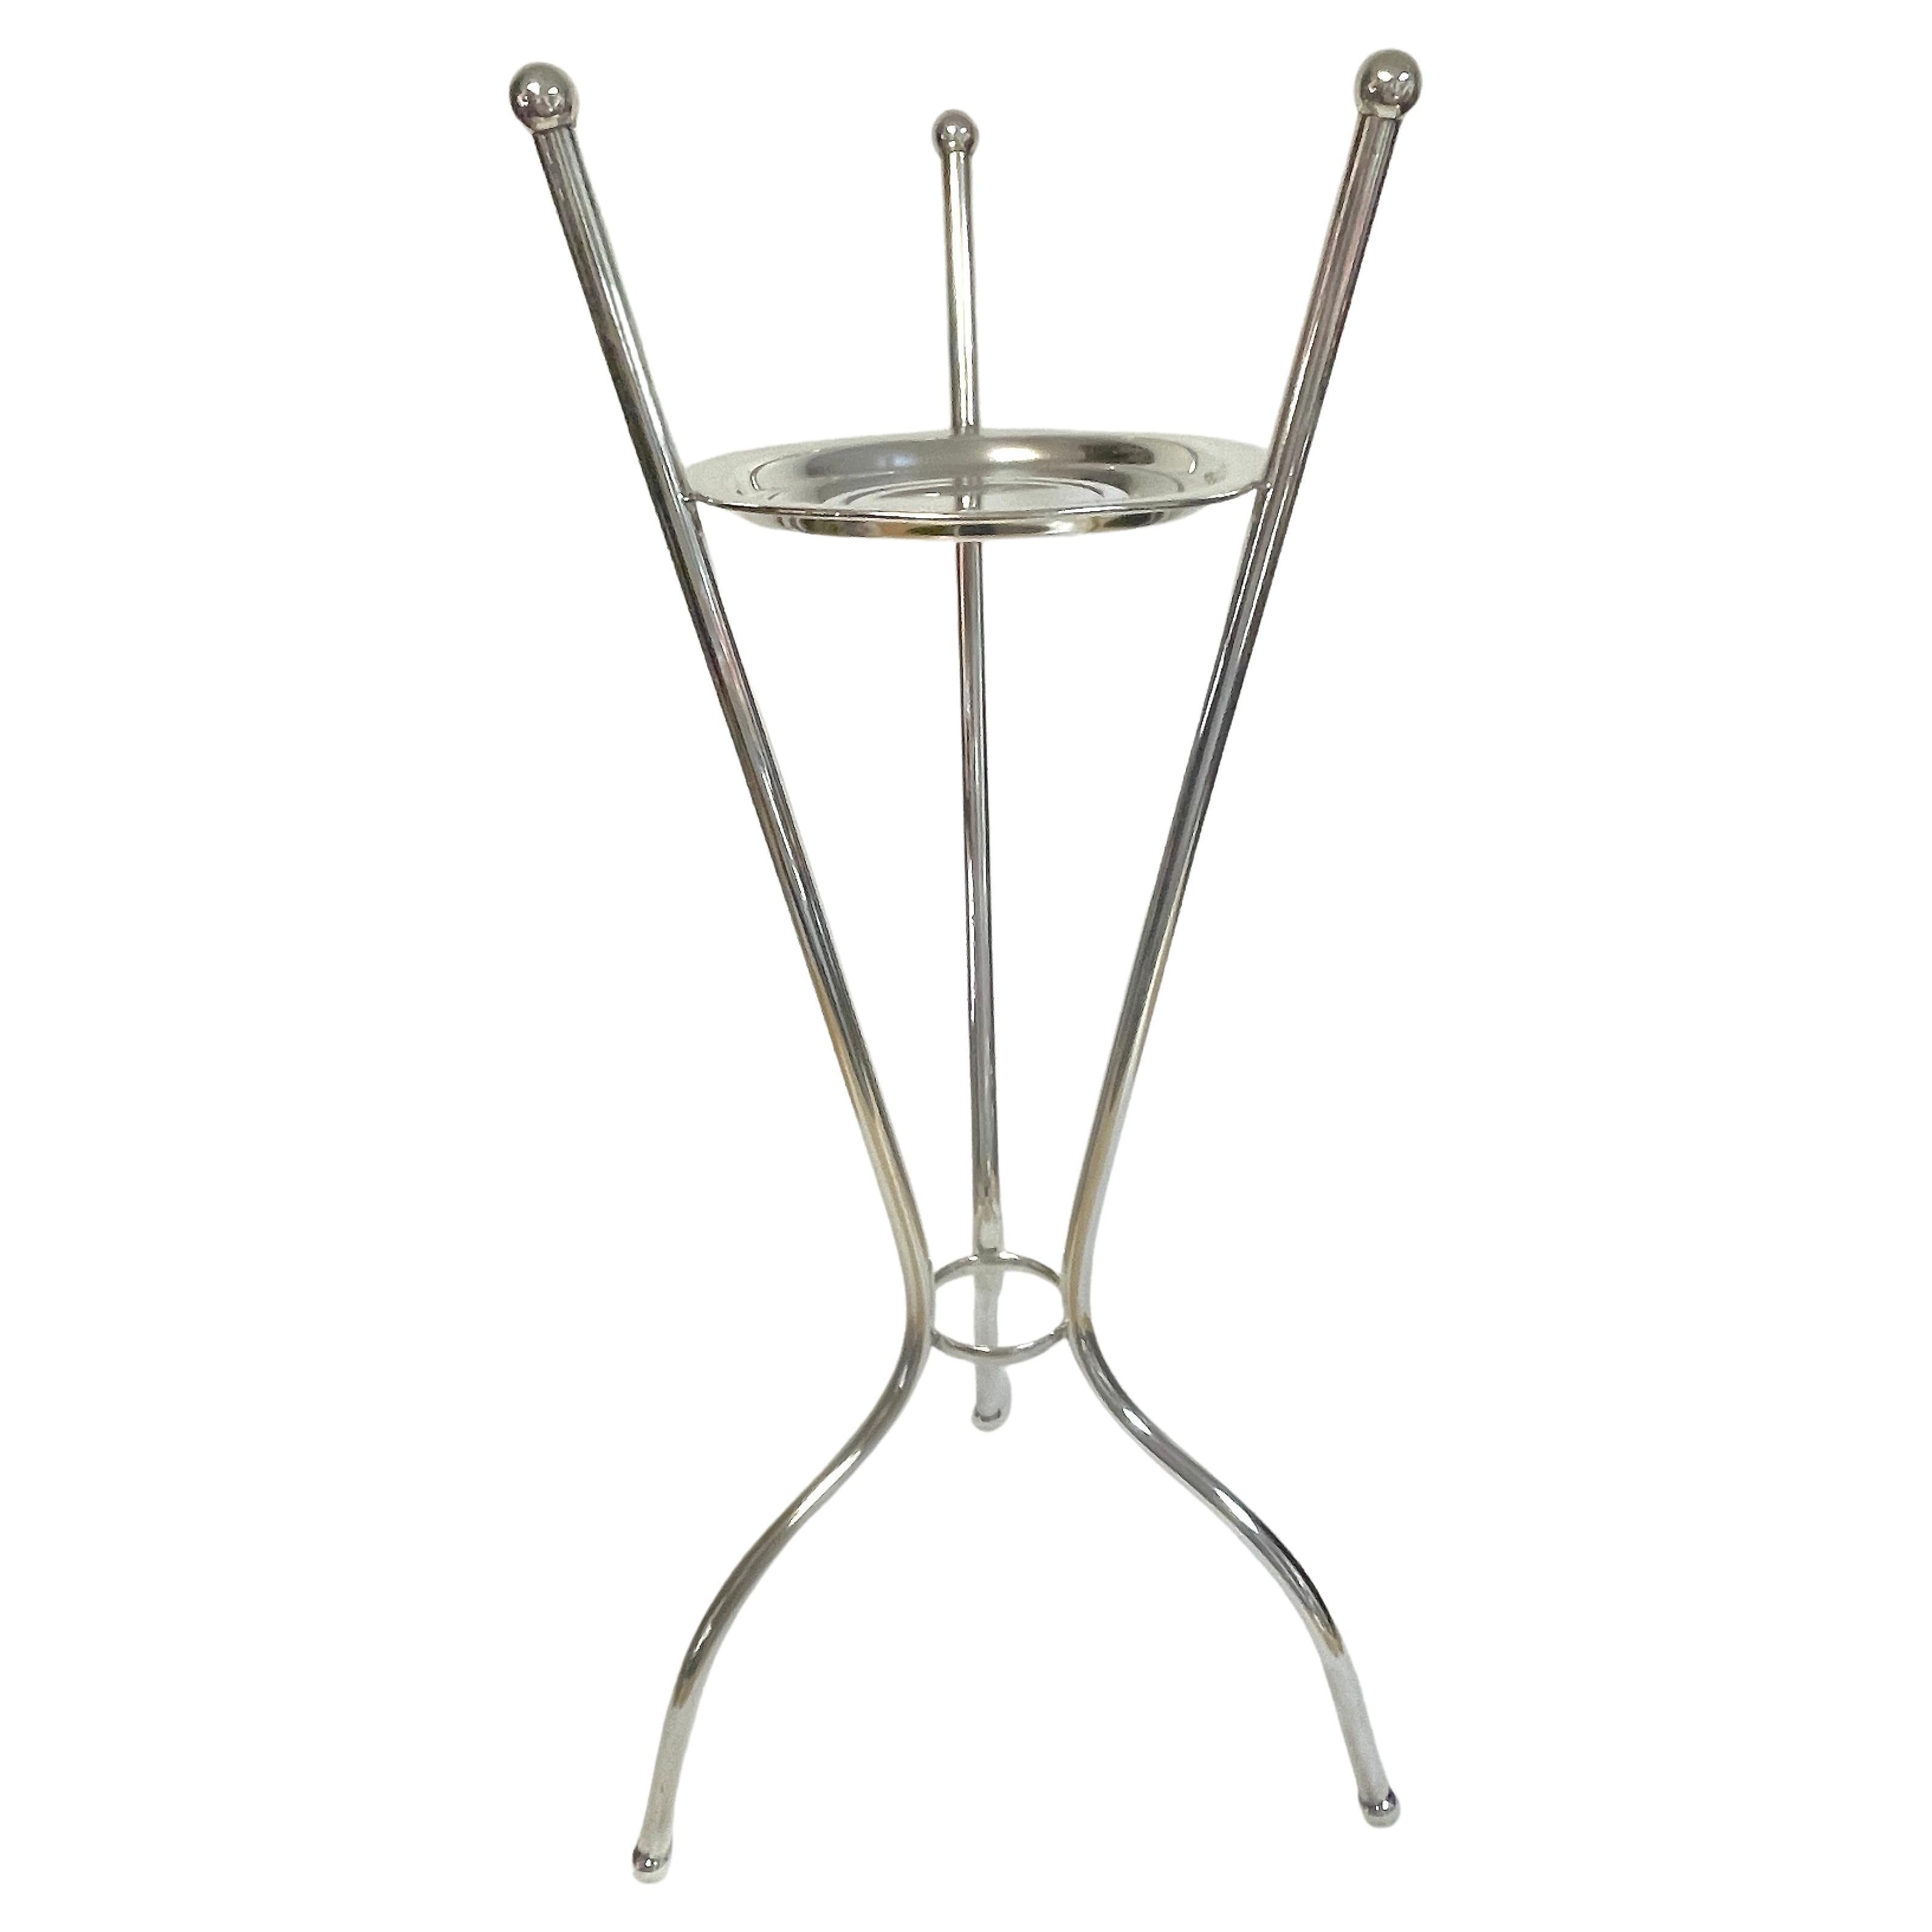 Art Deco/ Moderne Silverplated Champagne/Wine Bucket Stand